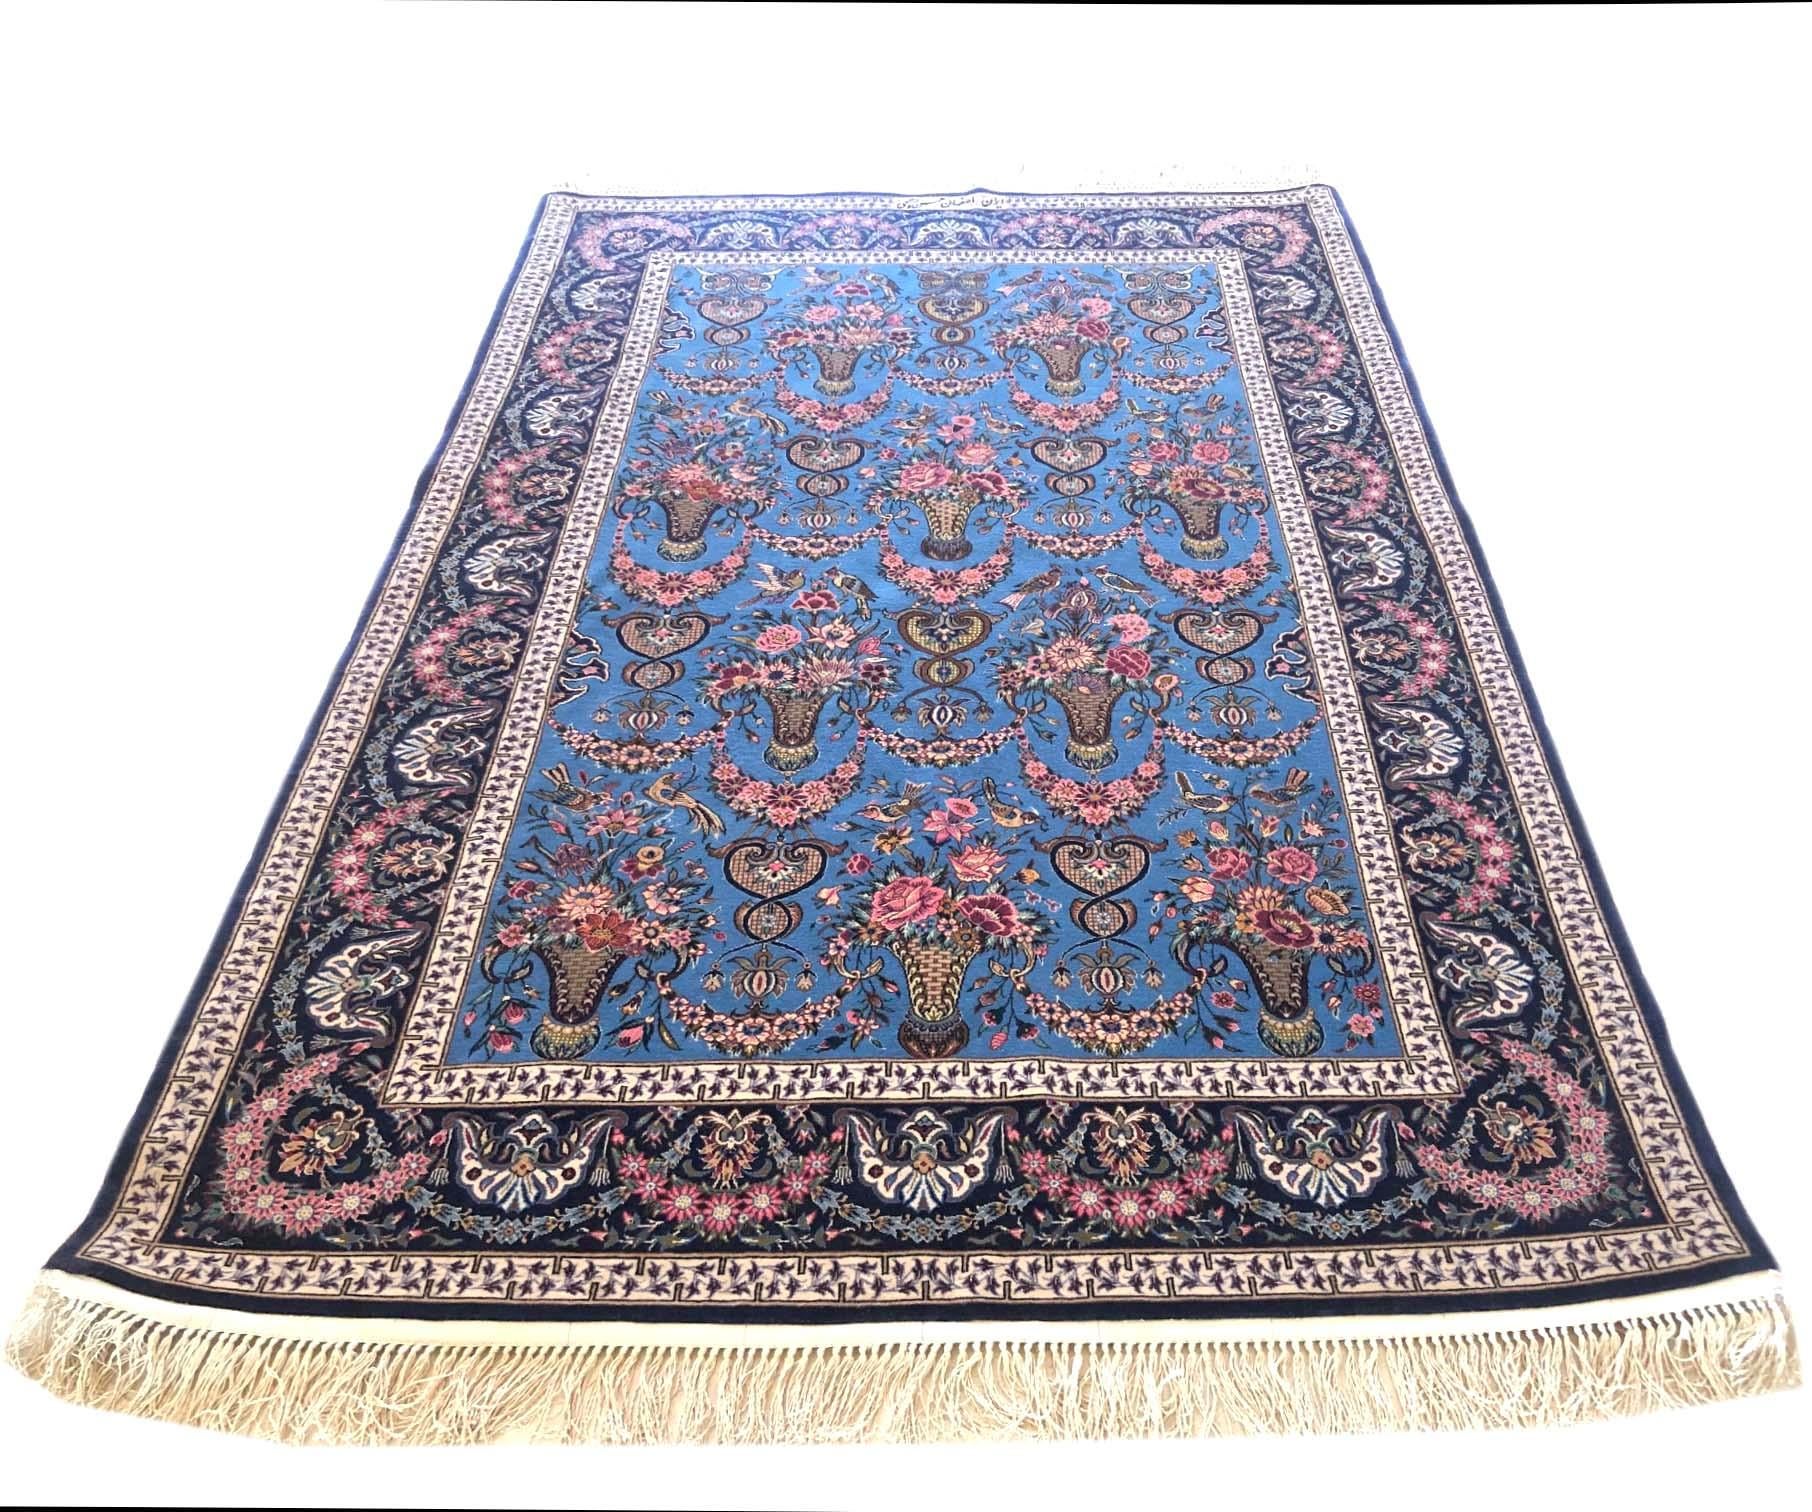 This authentic Persian Isfahan rug has wool and silk pile on silk foundation with an excellent condition. The color combination and design (A-symmetrical flower vase design) in this rug is absolutely unique. This rug has signed by Hassan Rahimi who